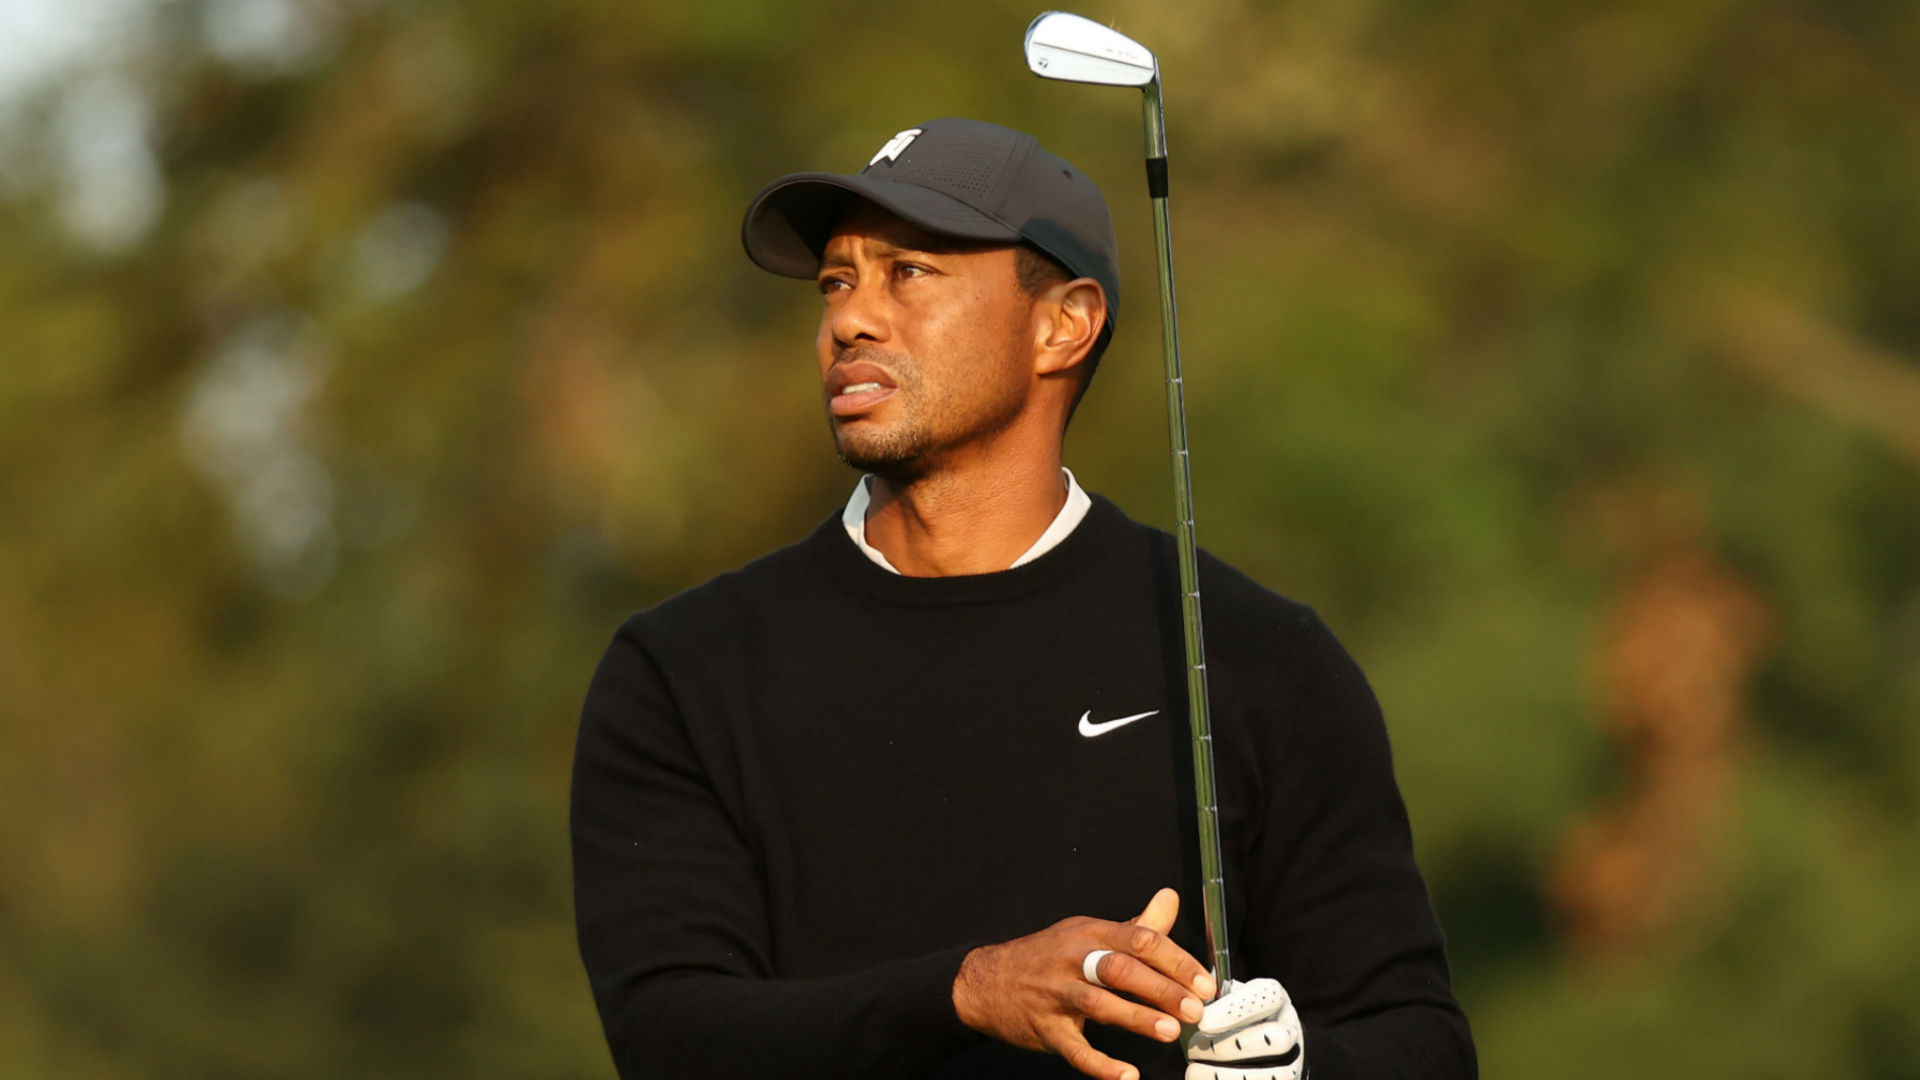 Tiger Woods at the US Open today Tee time, scorecard, how to watch